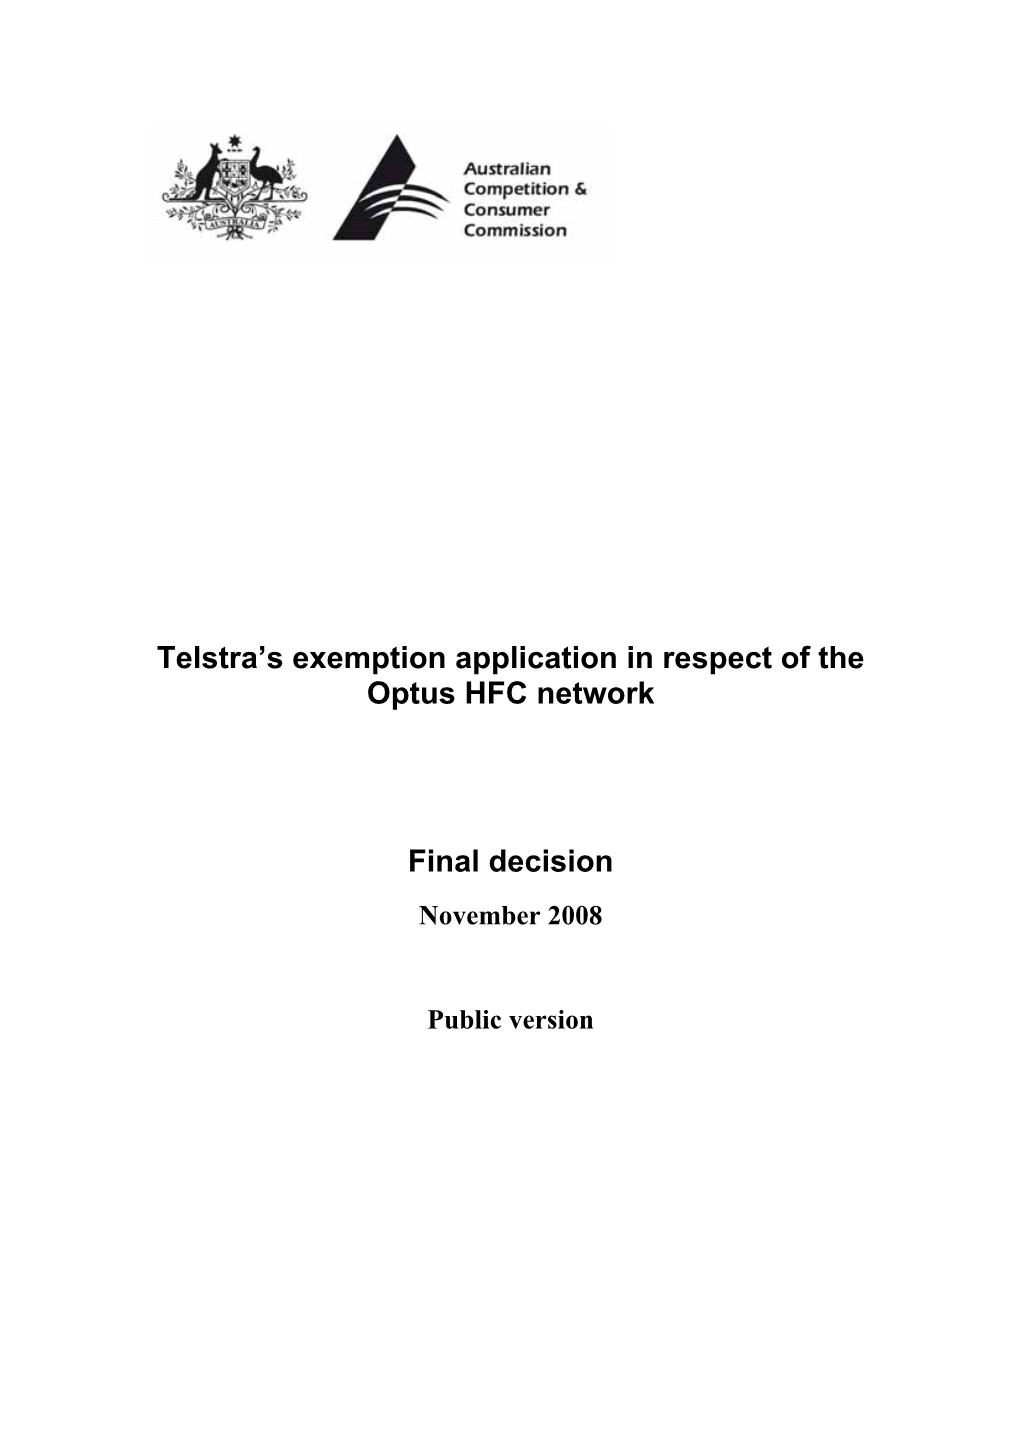 Telstra's Exemption Application in Respect of the Optus HFC Network